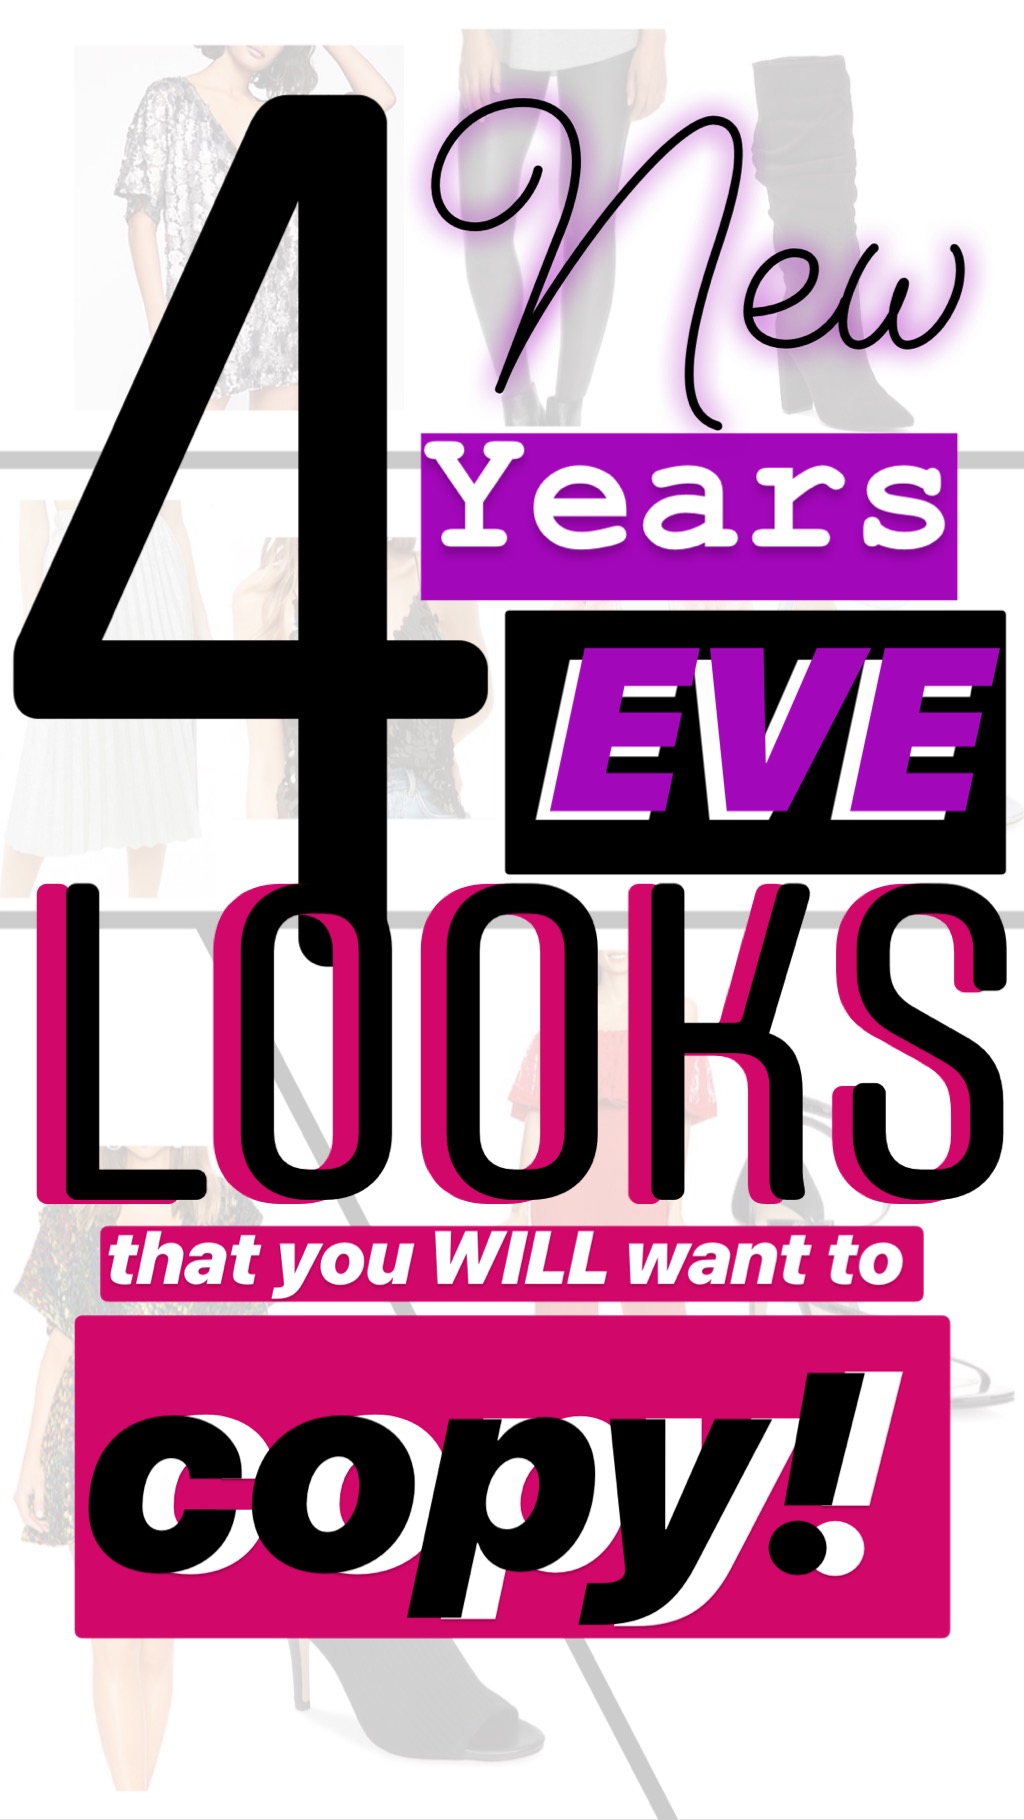 4 New Years Eve Looks That You WILL Want to Copy :: I Adore What I Love Blog :: www.iadorewhatilove.com #iadorewhatilove